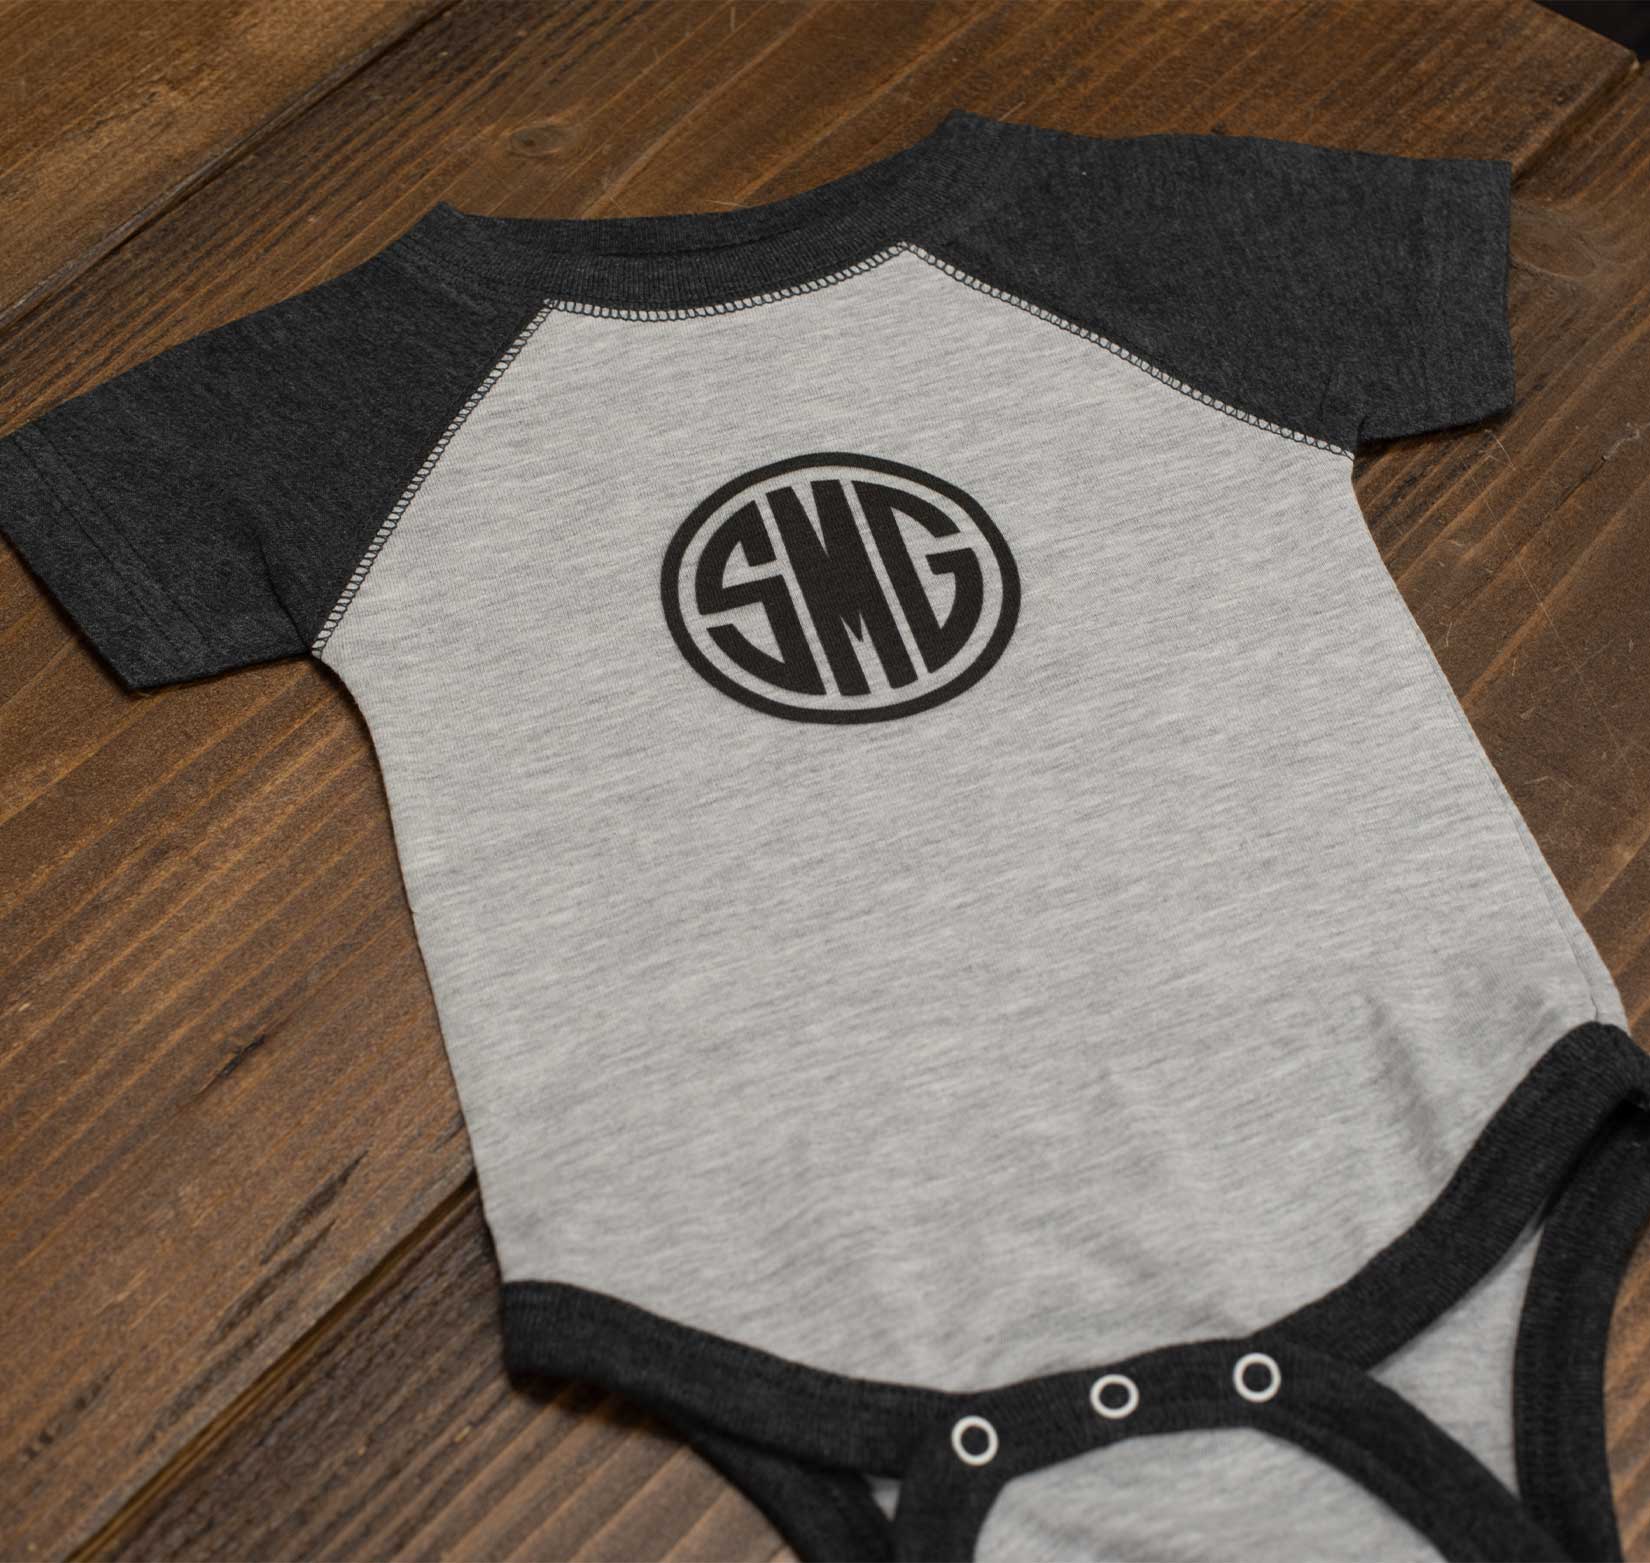 A gray and white baby onesie screen printed with a black Stray Media Group logo